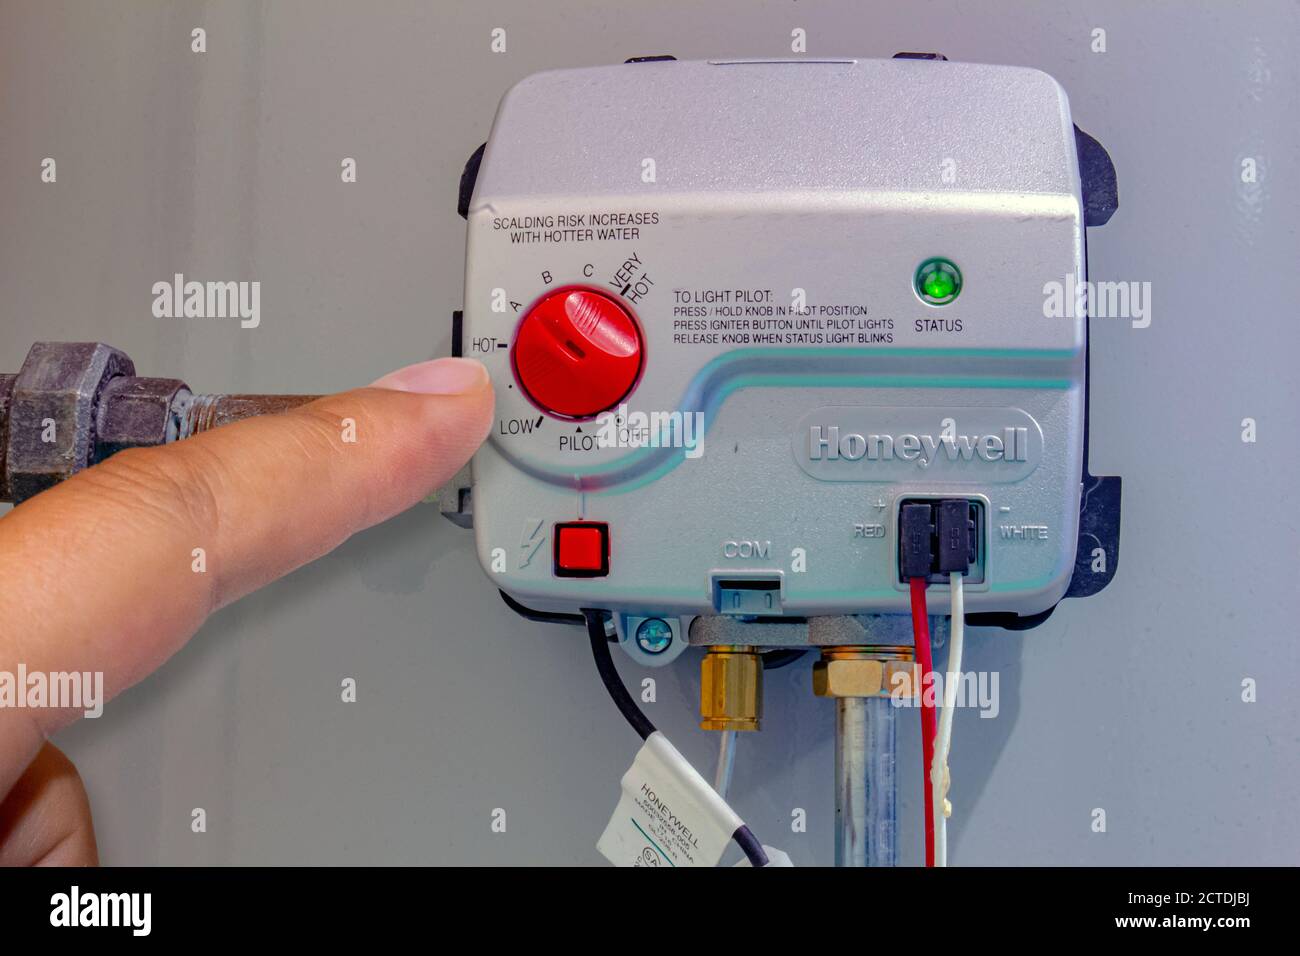 Calgary, Alberta, Canada. Sep 22, 2020. A person adjusting a Honeywell Gas control valve, residential gas water heater. Boiler Heating system. Stock Photo